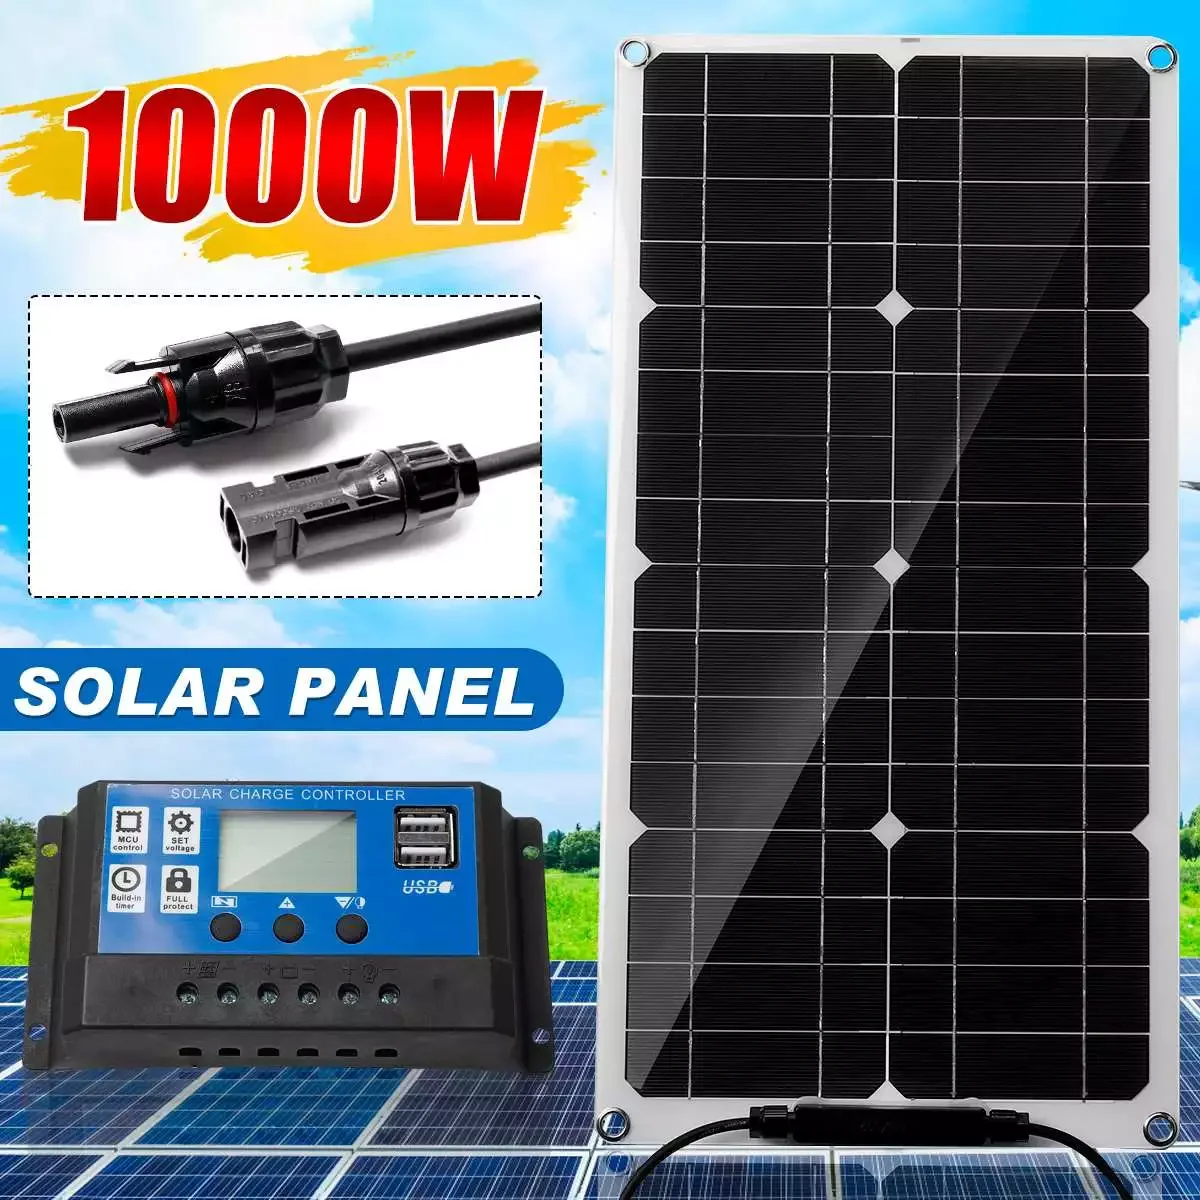 

NEW2023 1000W Solar Panel Kit 12V USB Charging Solar Cell Board for Phone RV Car MP3 PADWaterproof Outdoor Battery Supply 30A Co